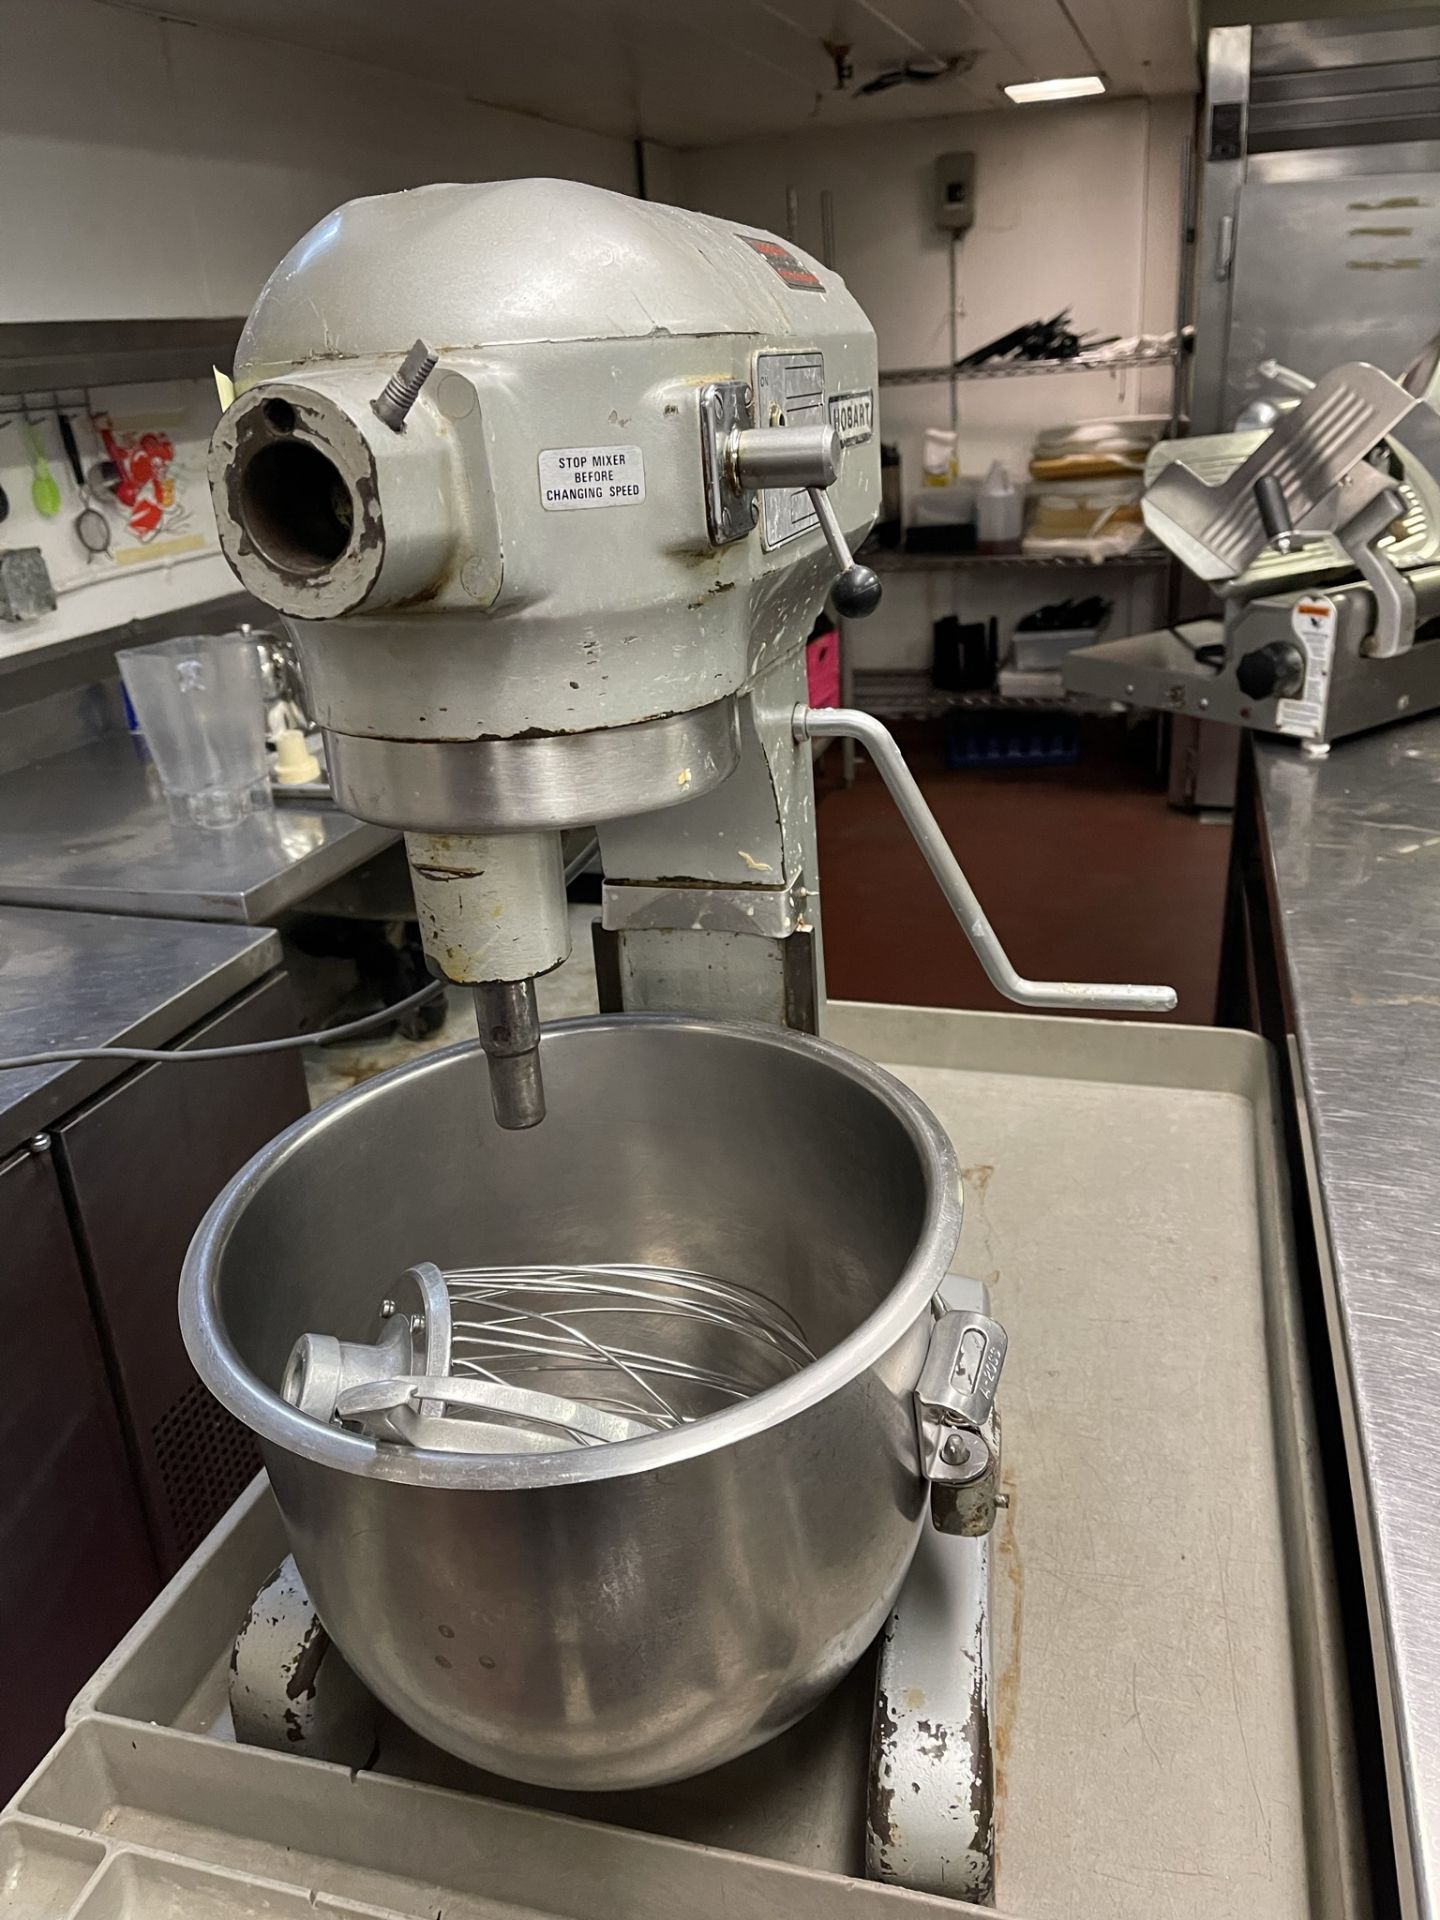 Hobart Mixer M: A200; Tested Working; Located in Main Kitchen